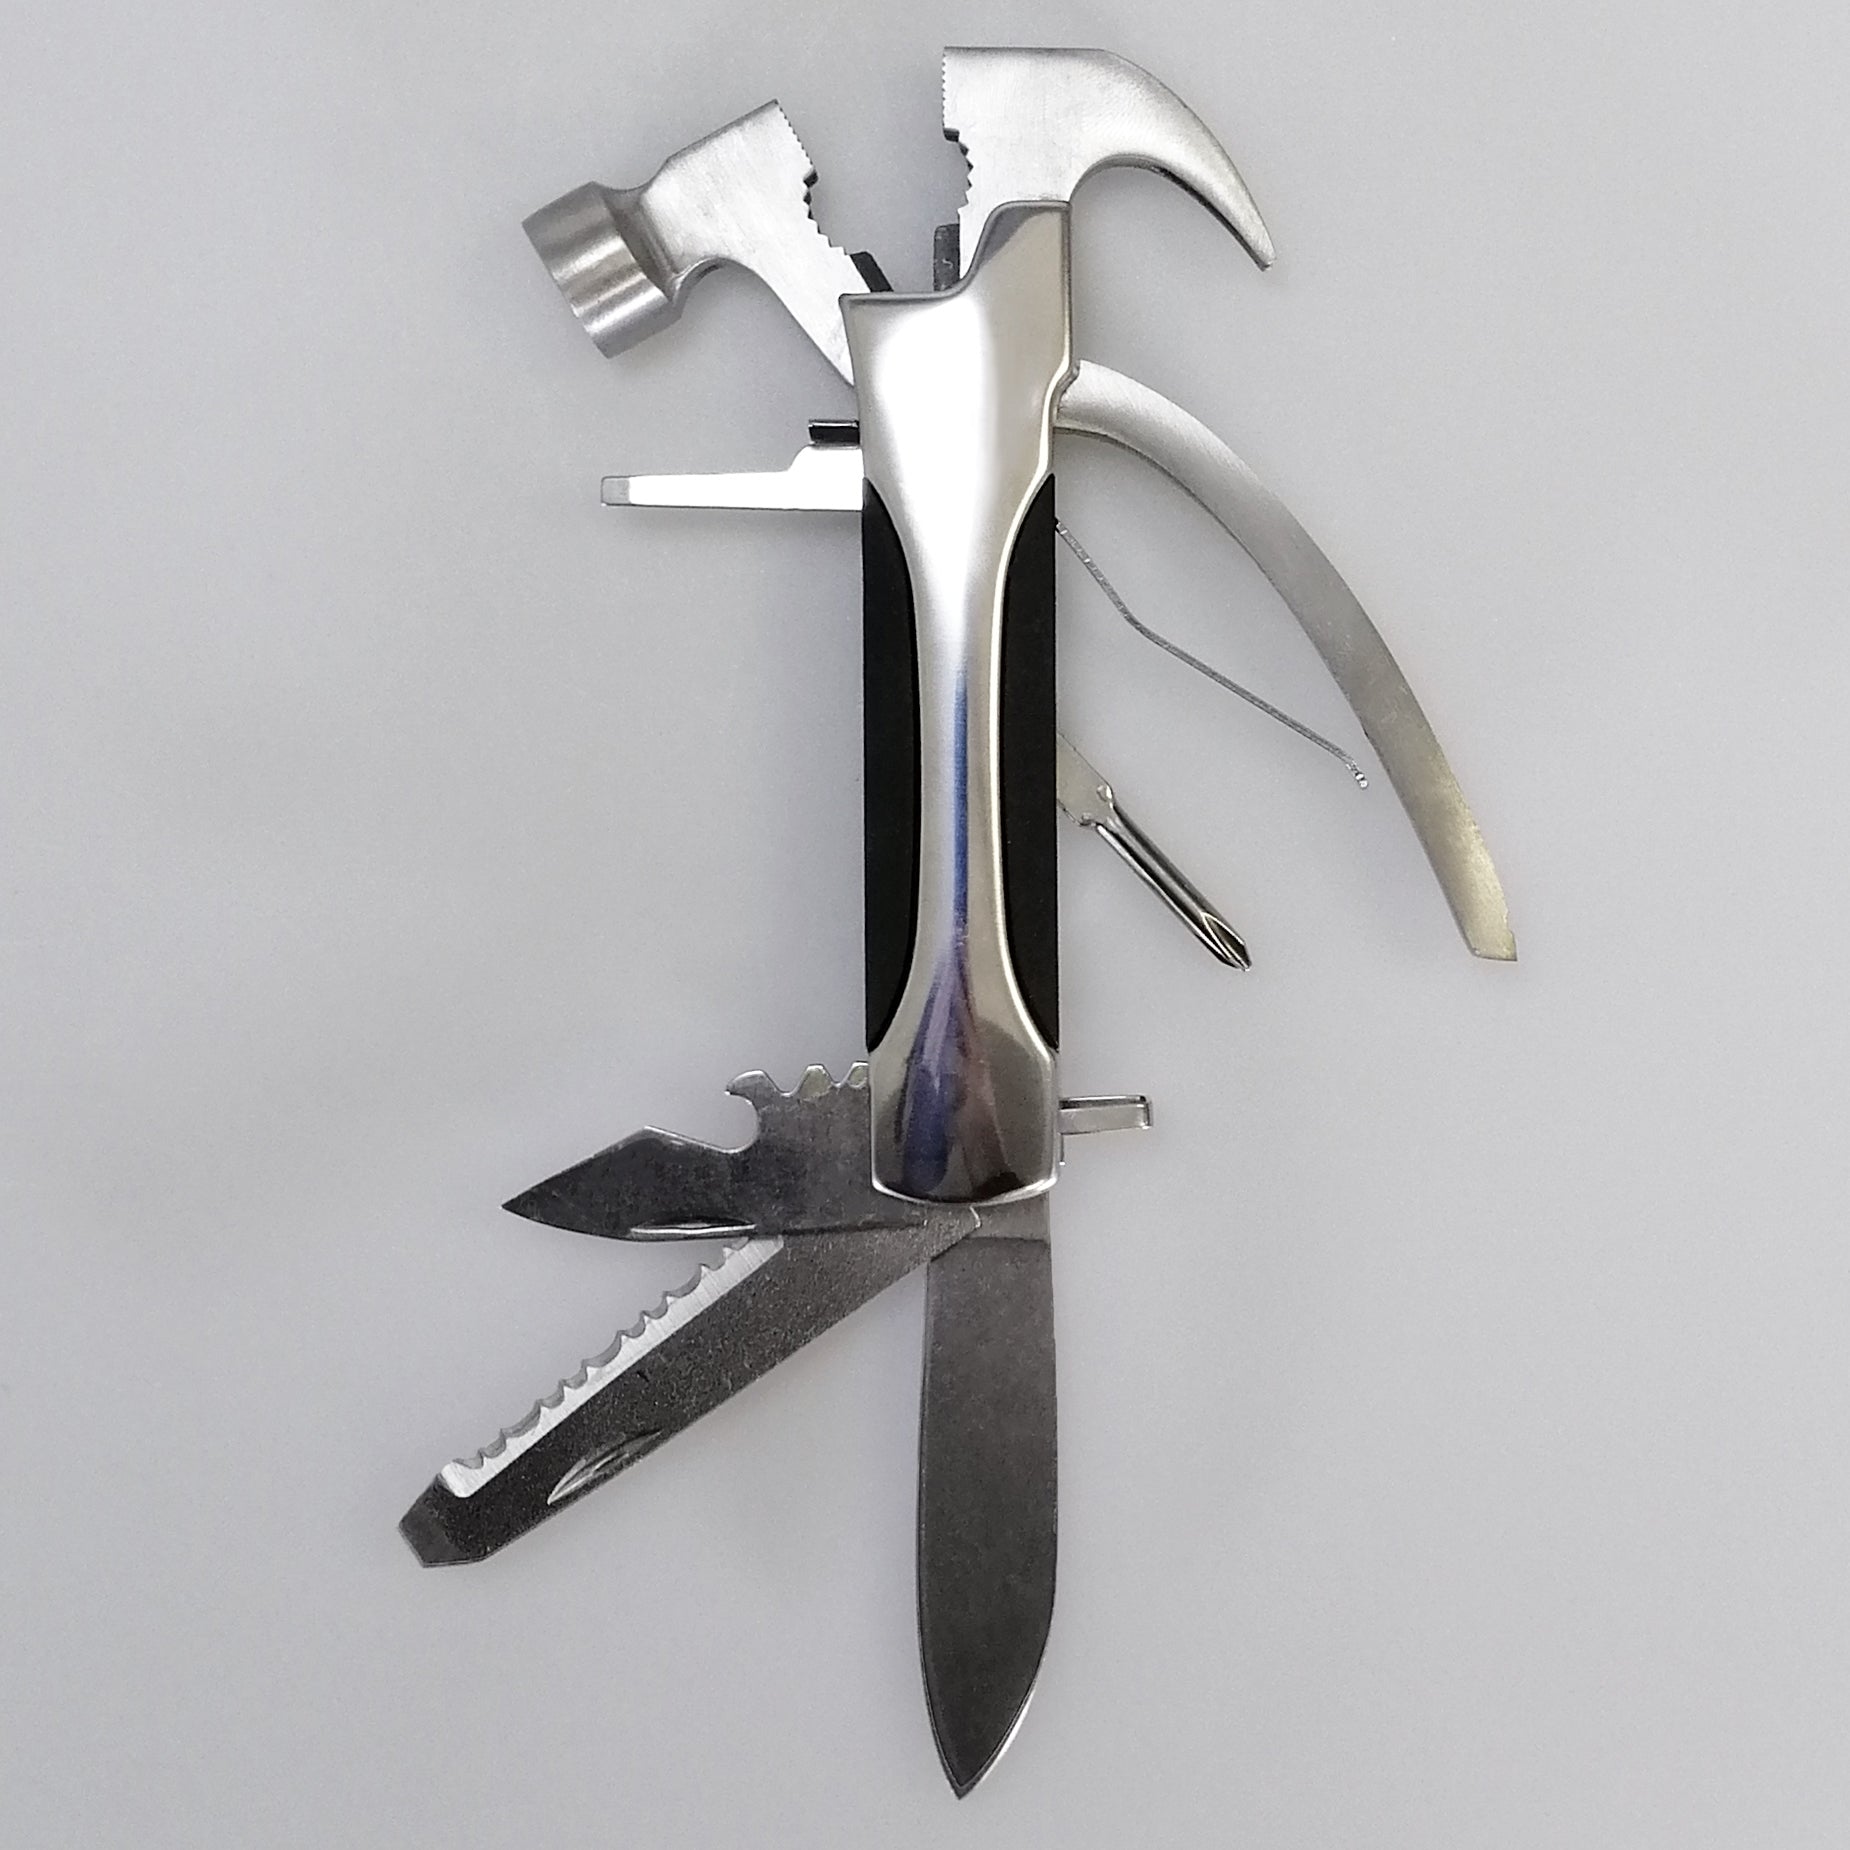 Gents Society - 9 Feature Multi-tool